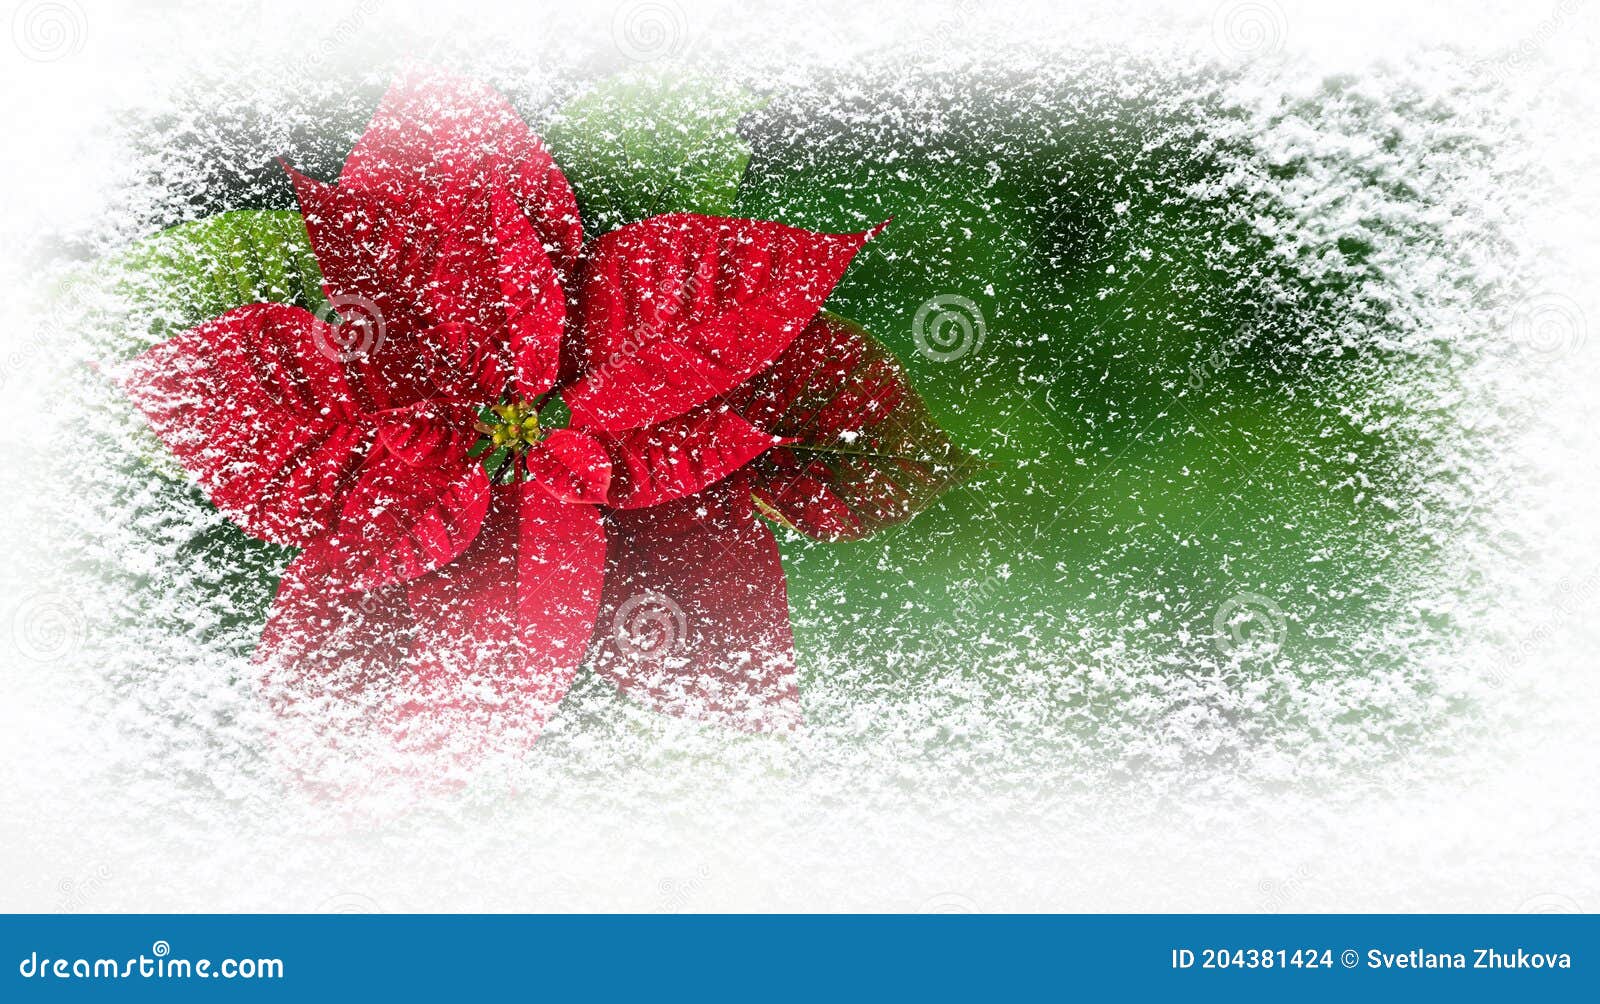 flor de pascua or poinsettia flower in winter covered with snowfall greating card